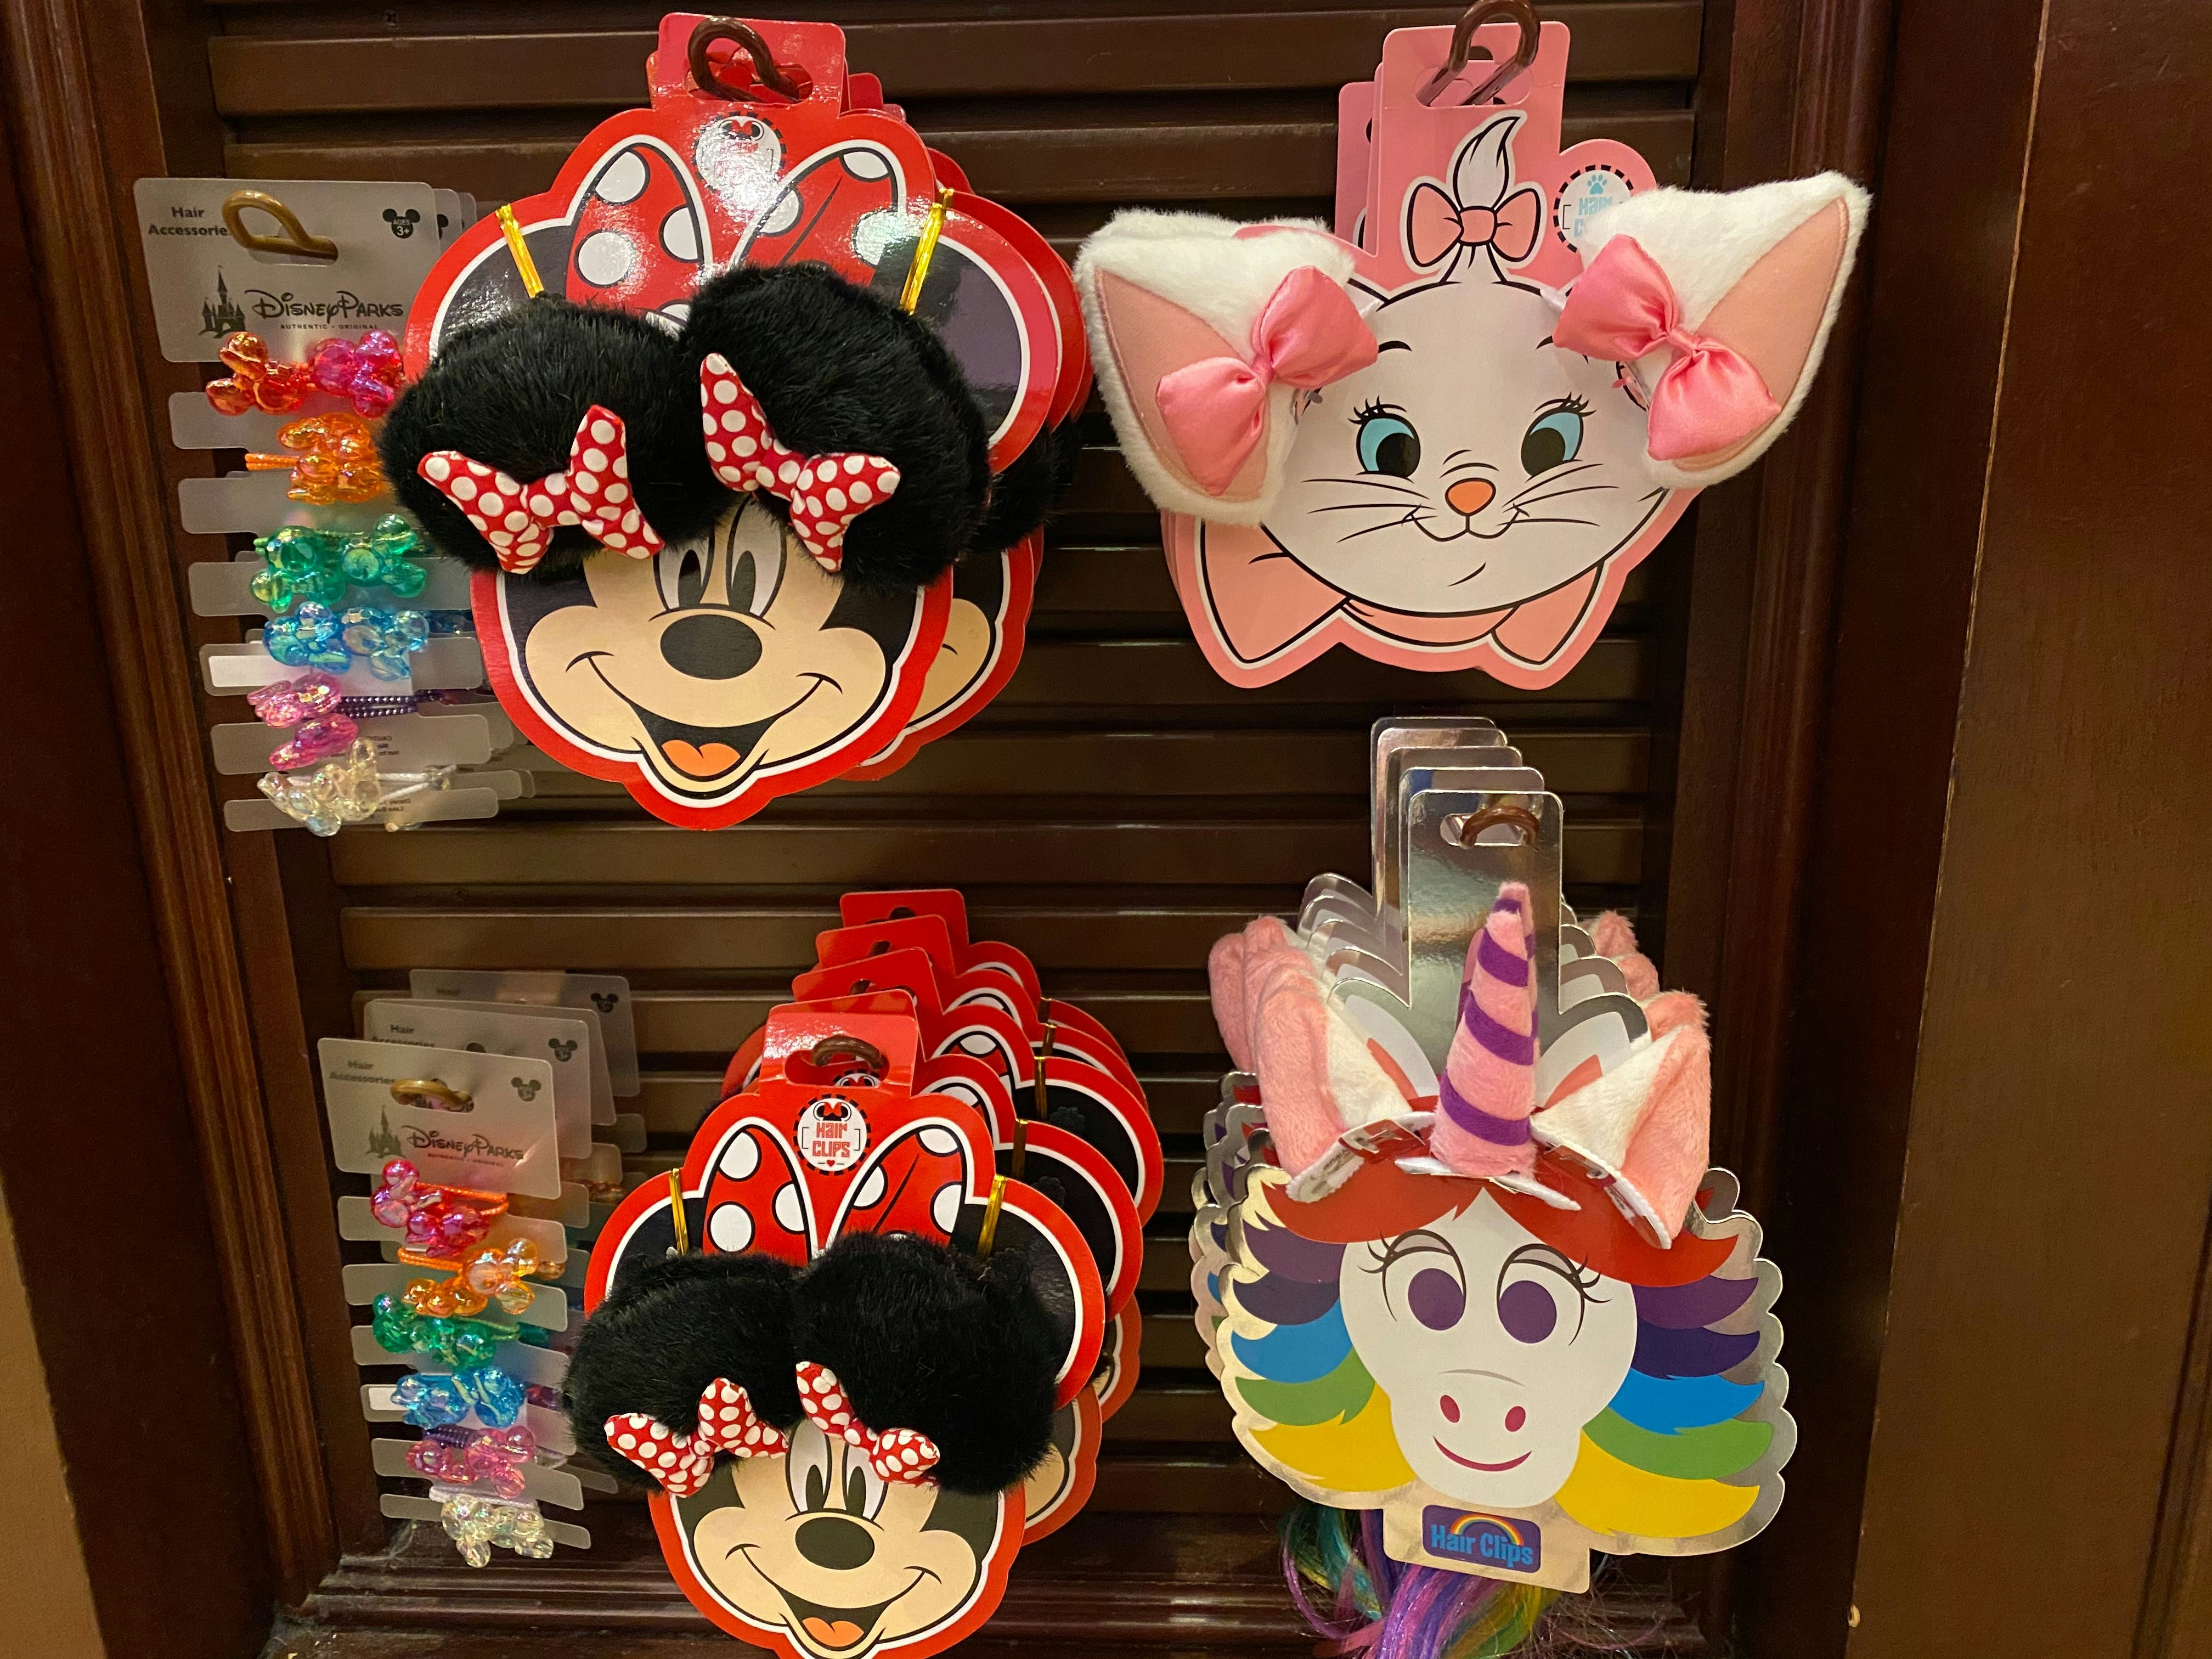 New Character Hair Clip Accessories (Minnie Mouse, Marie, Rainbow Unicorn) Arrive at Disneyland